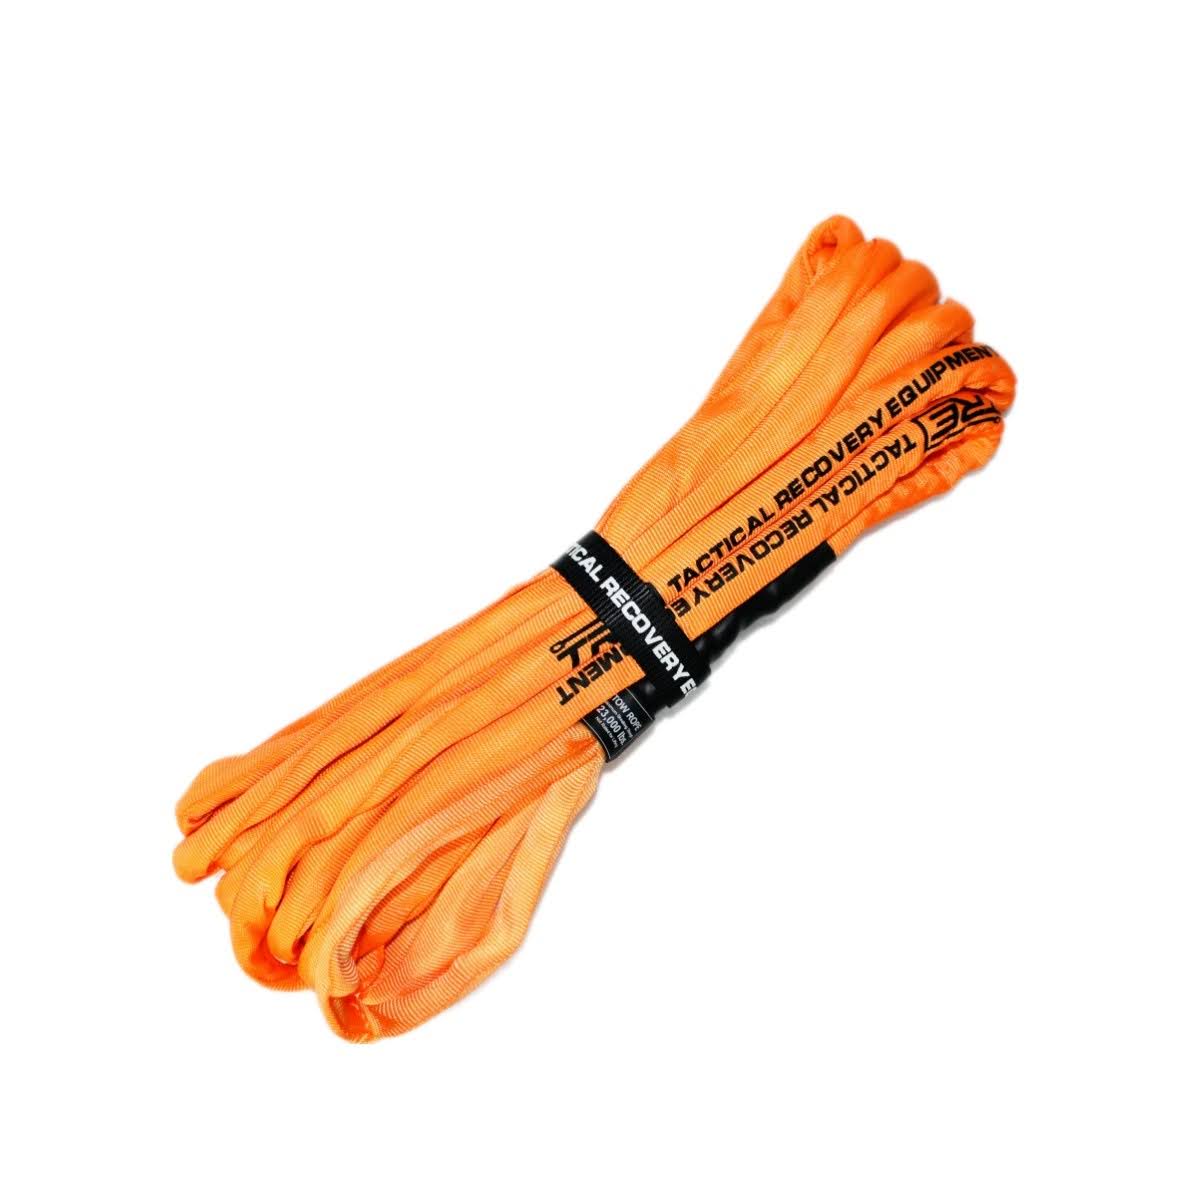 Standard Tow Rope - 23,000 lbs. Minimum Breaking Strength- Vehicles Up to 7,500 lbs. (Product Length: 20 ft.)